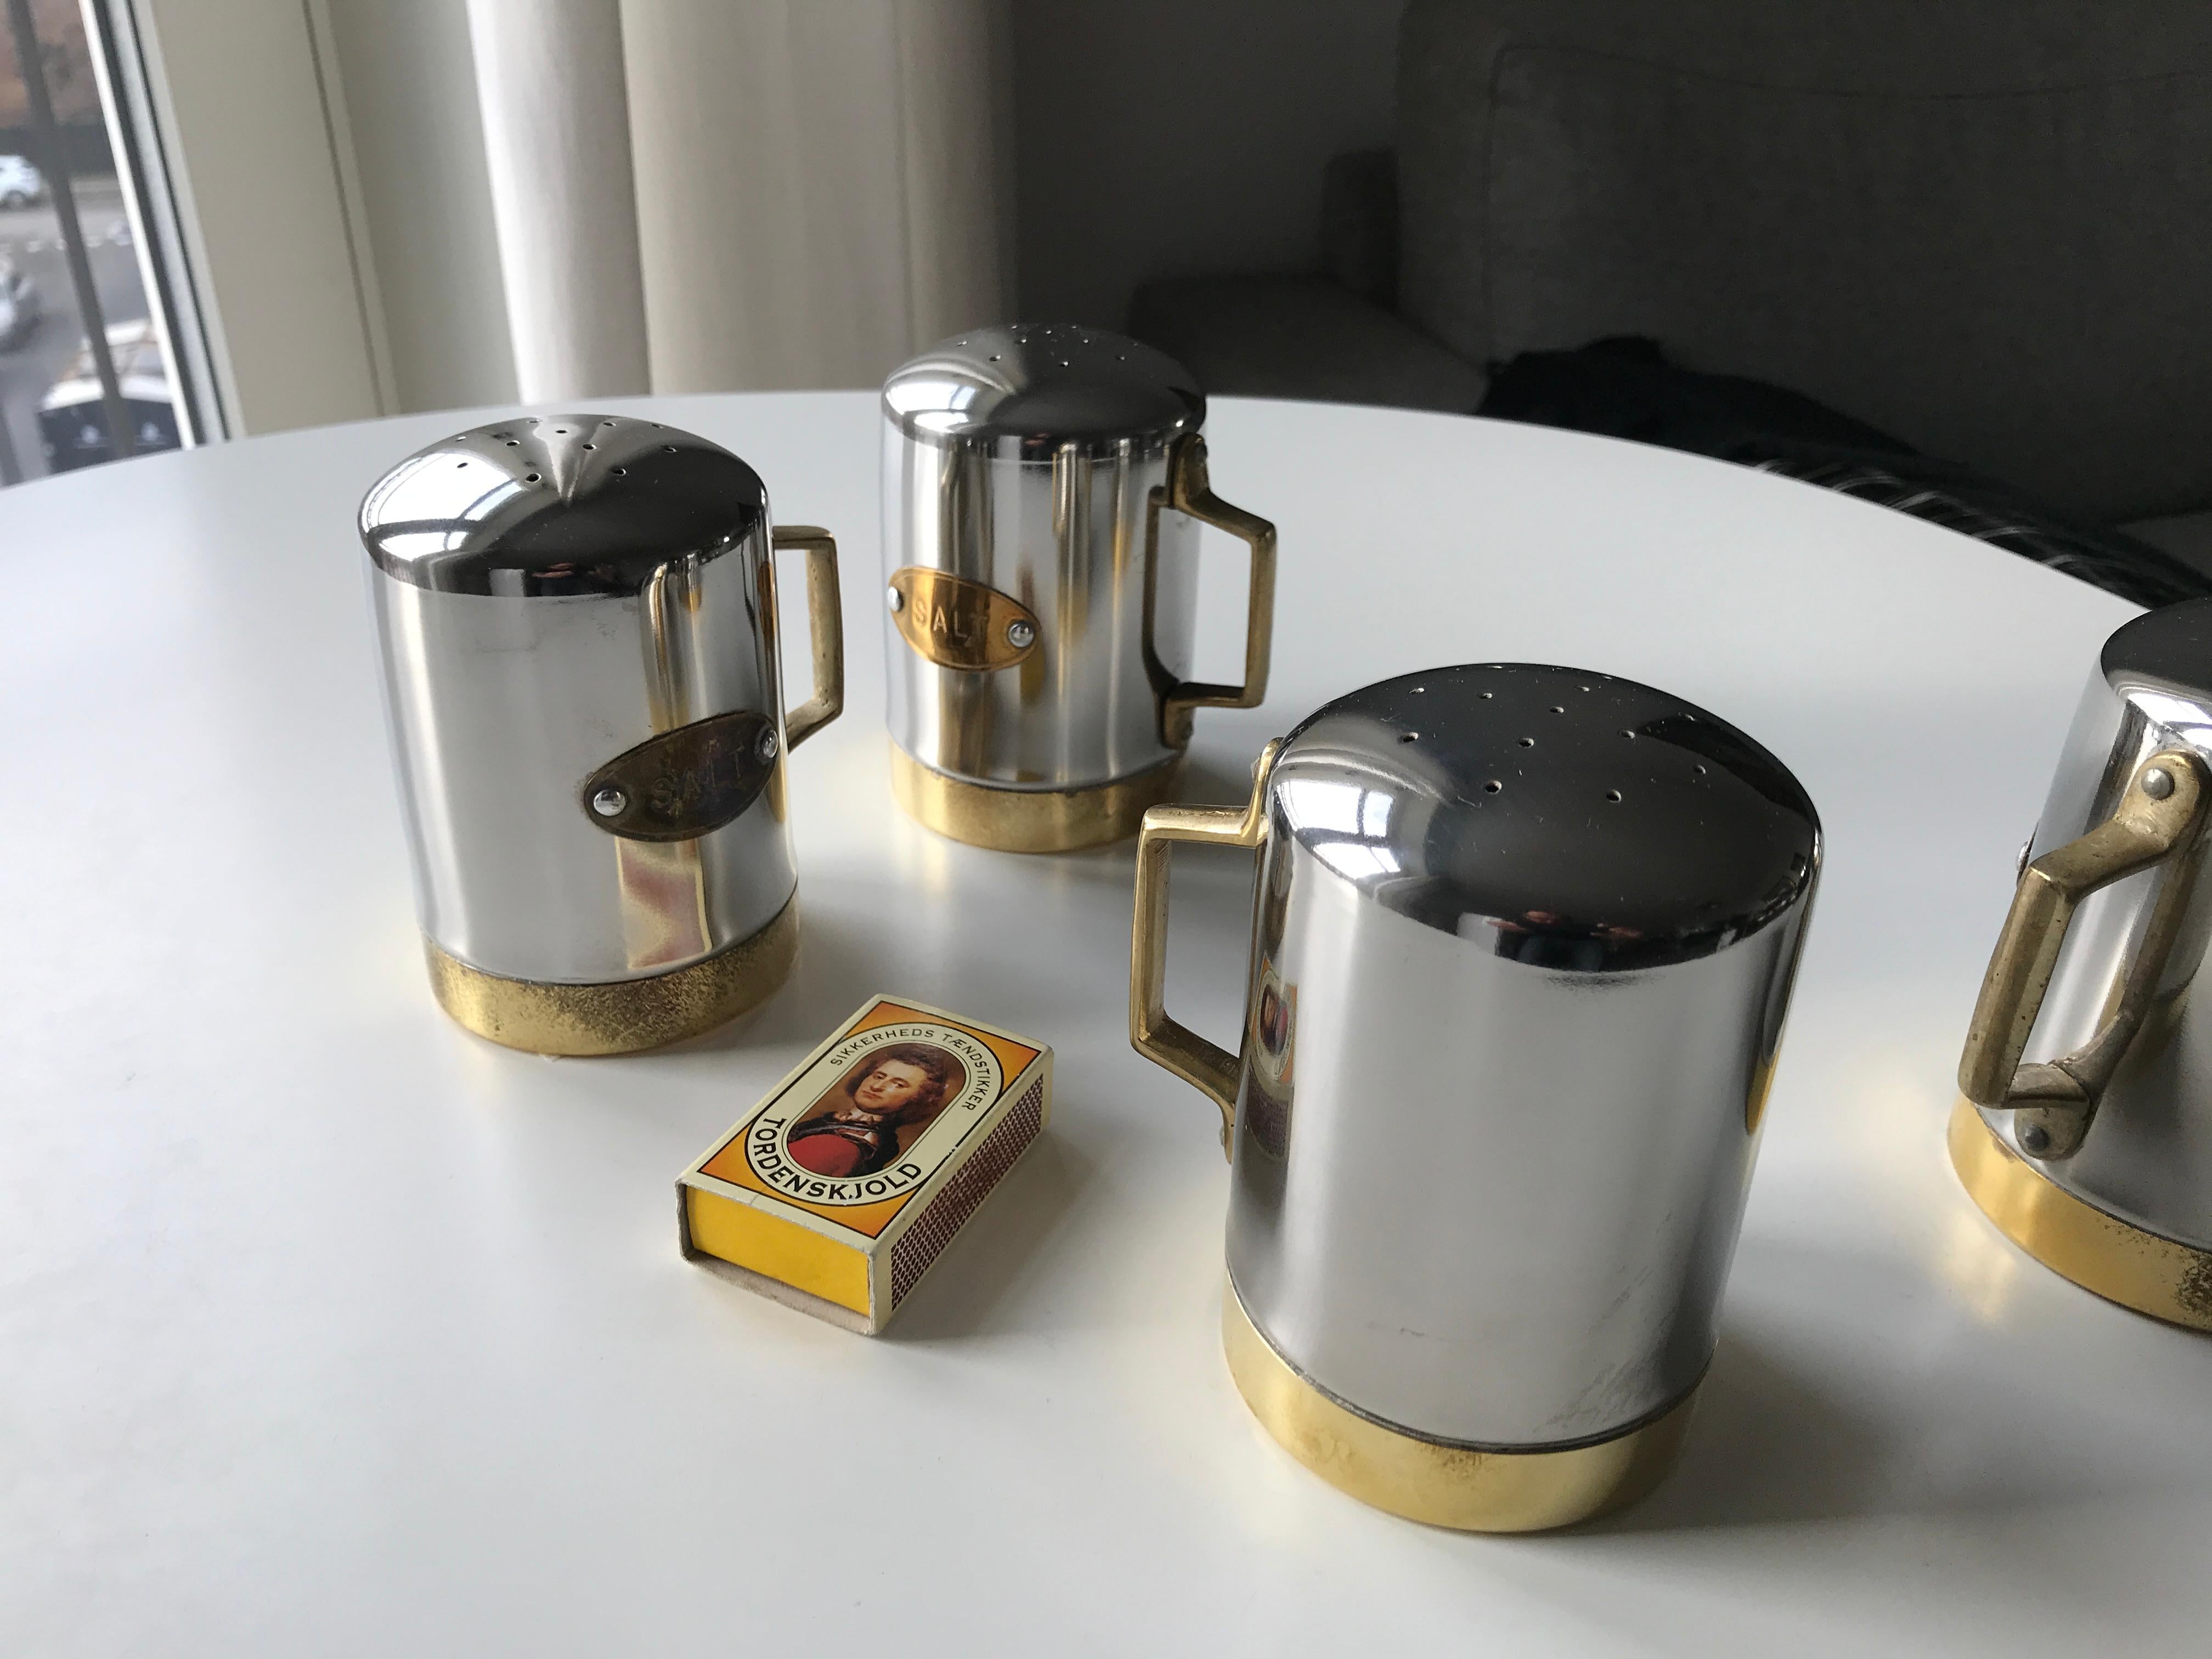 Salt and Pepper Space Age Vintage Diner Set, 1960s Chrome and Brass For Sale 13